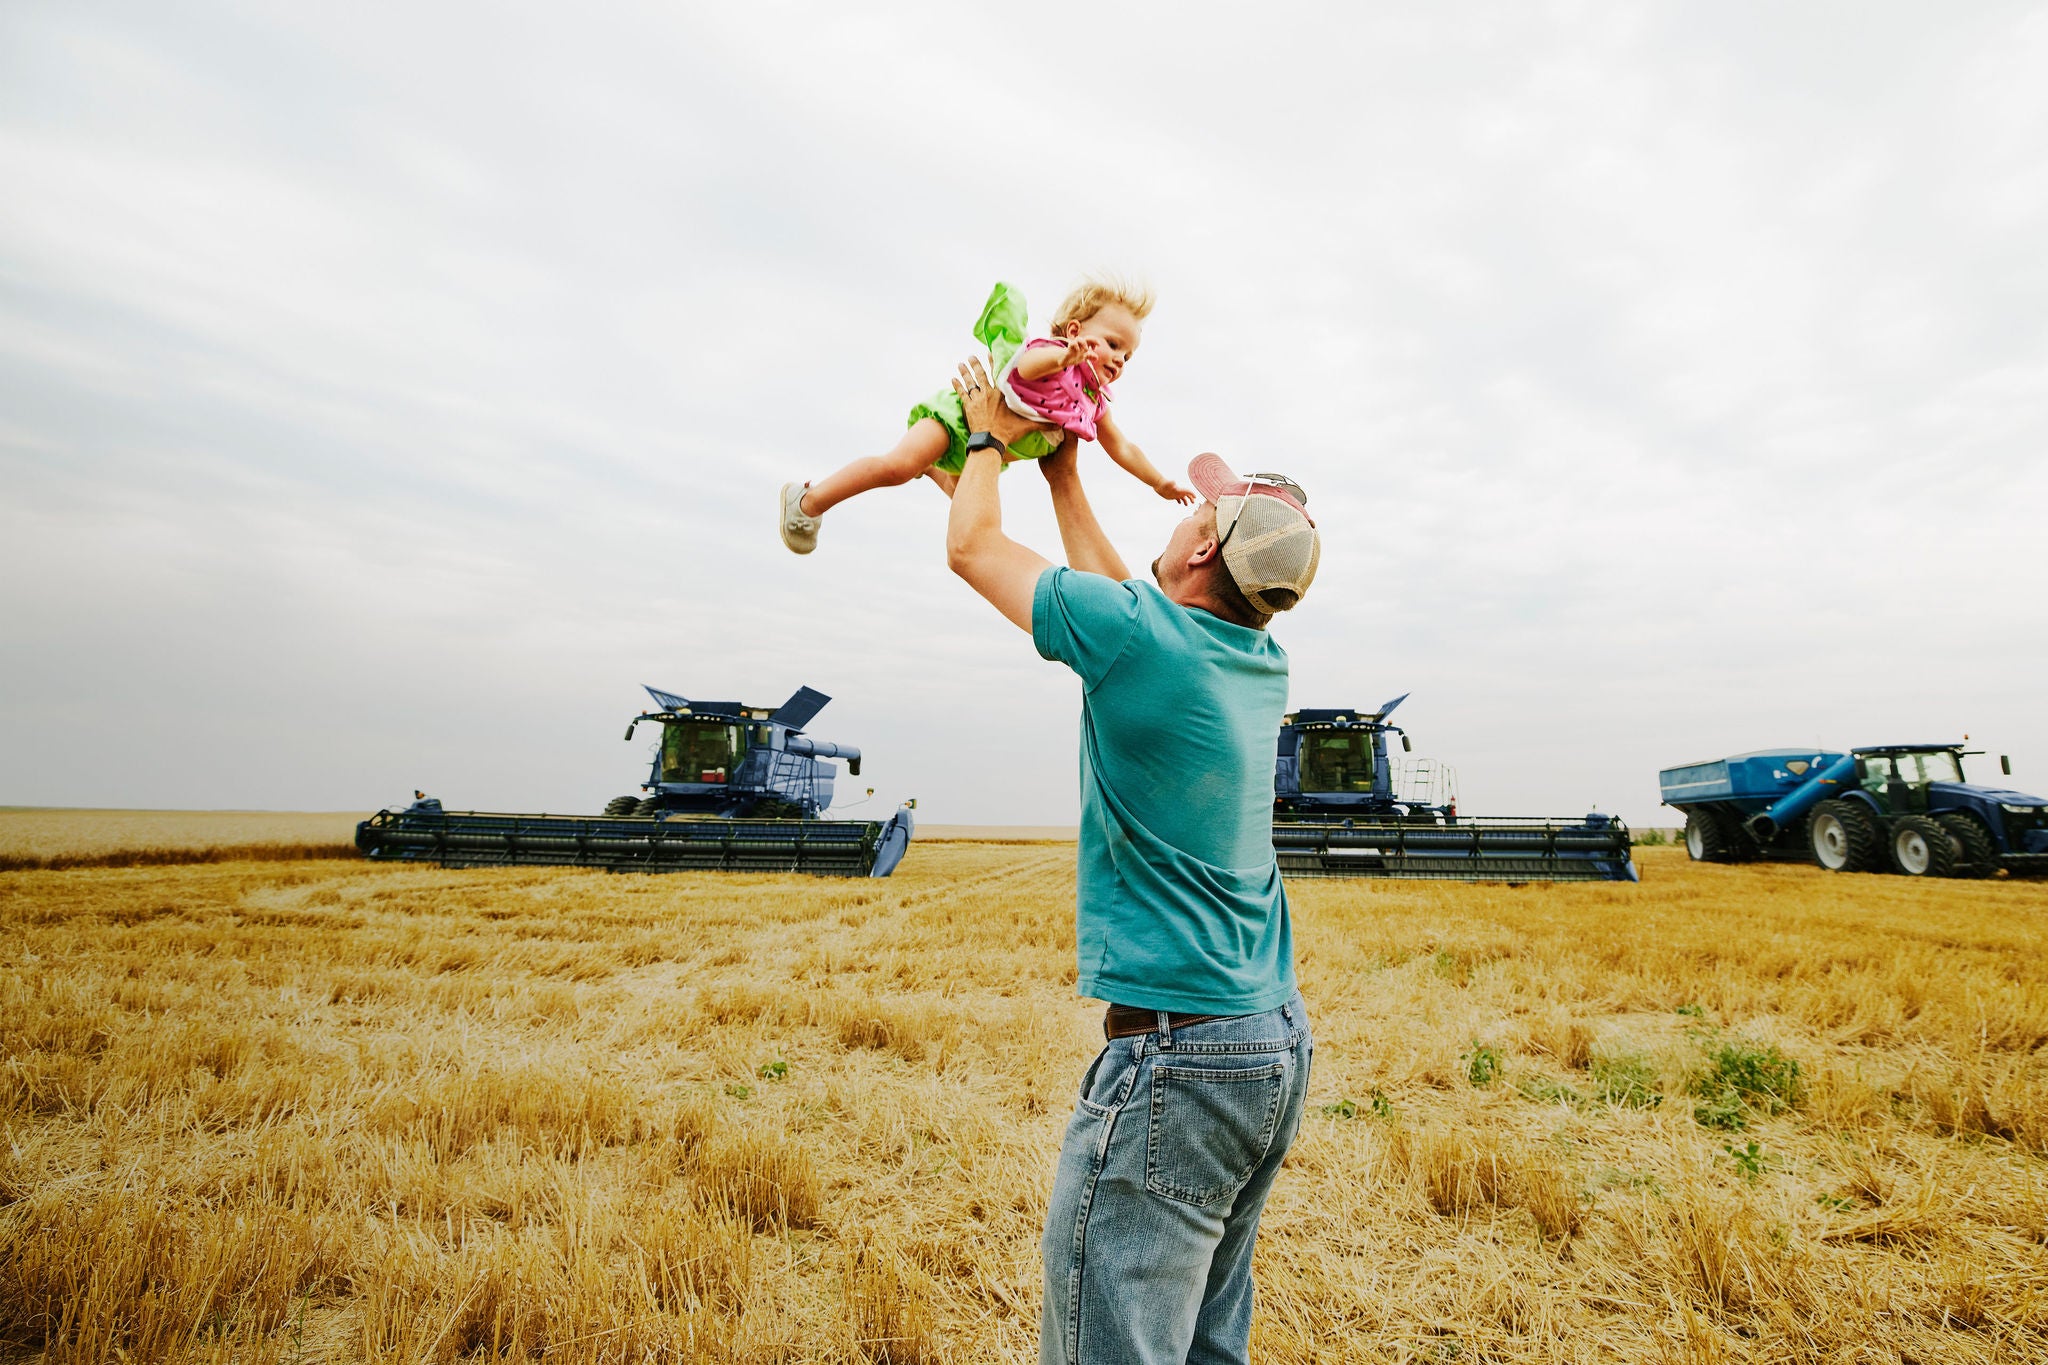 A farmer throwing young daughter up in air in wheat field during summer harvest